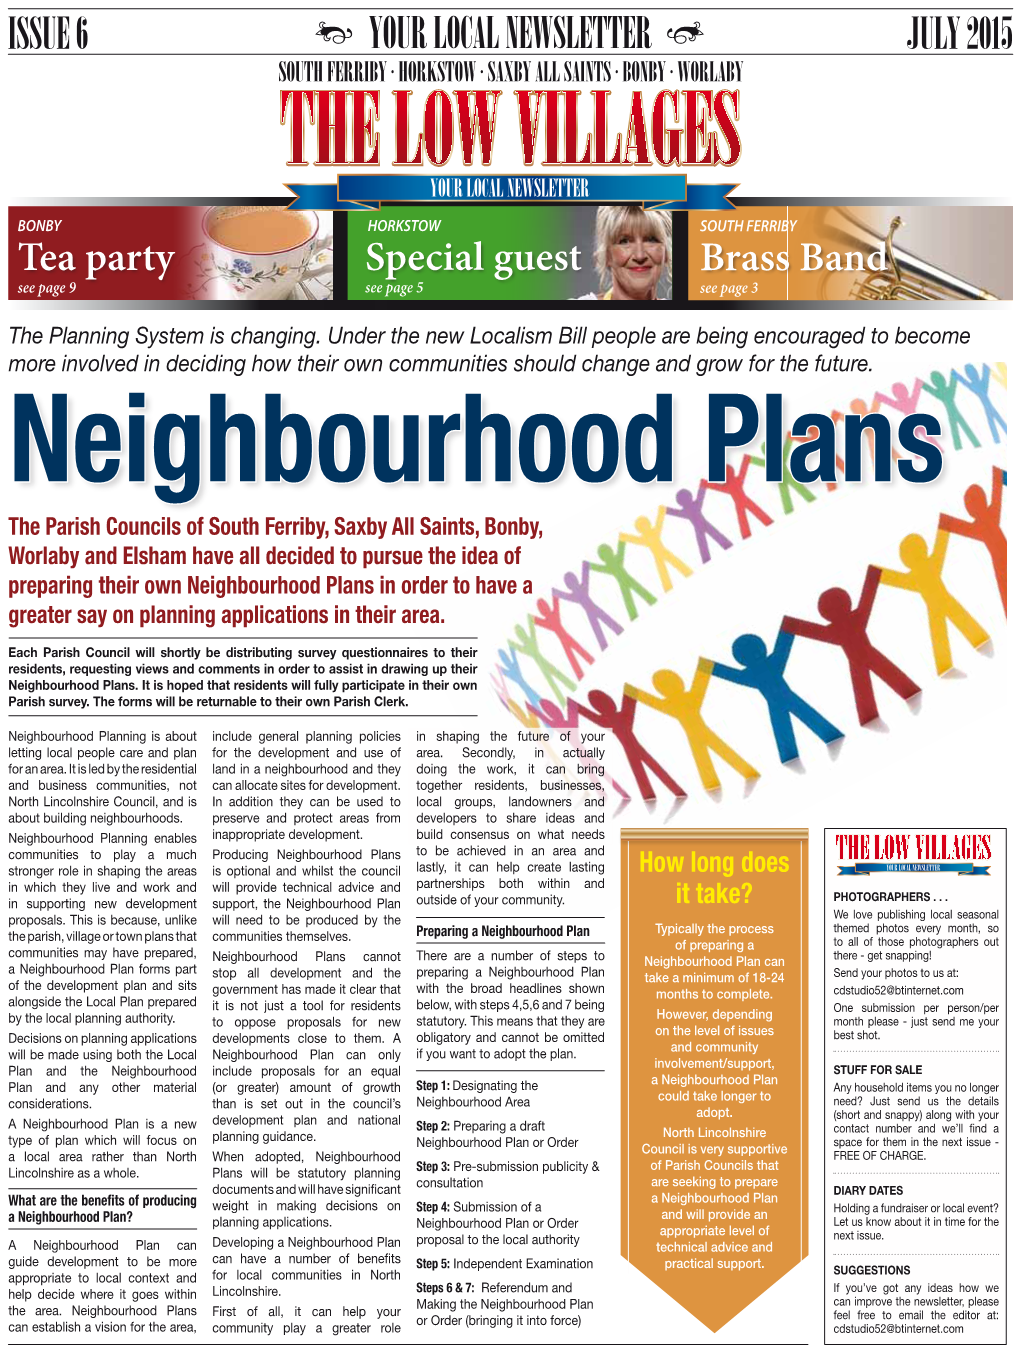 Your Local Newsletter July 2015 Issue 6